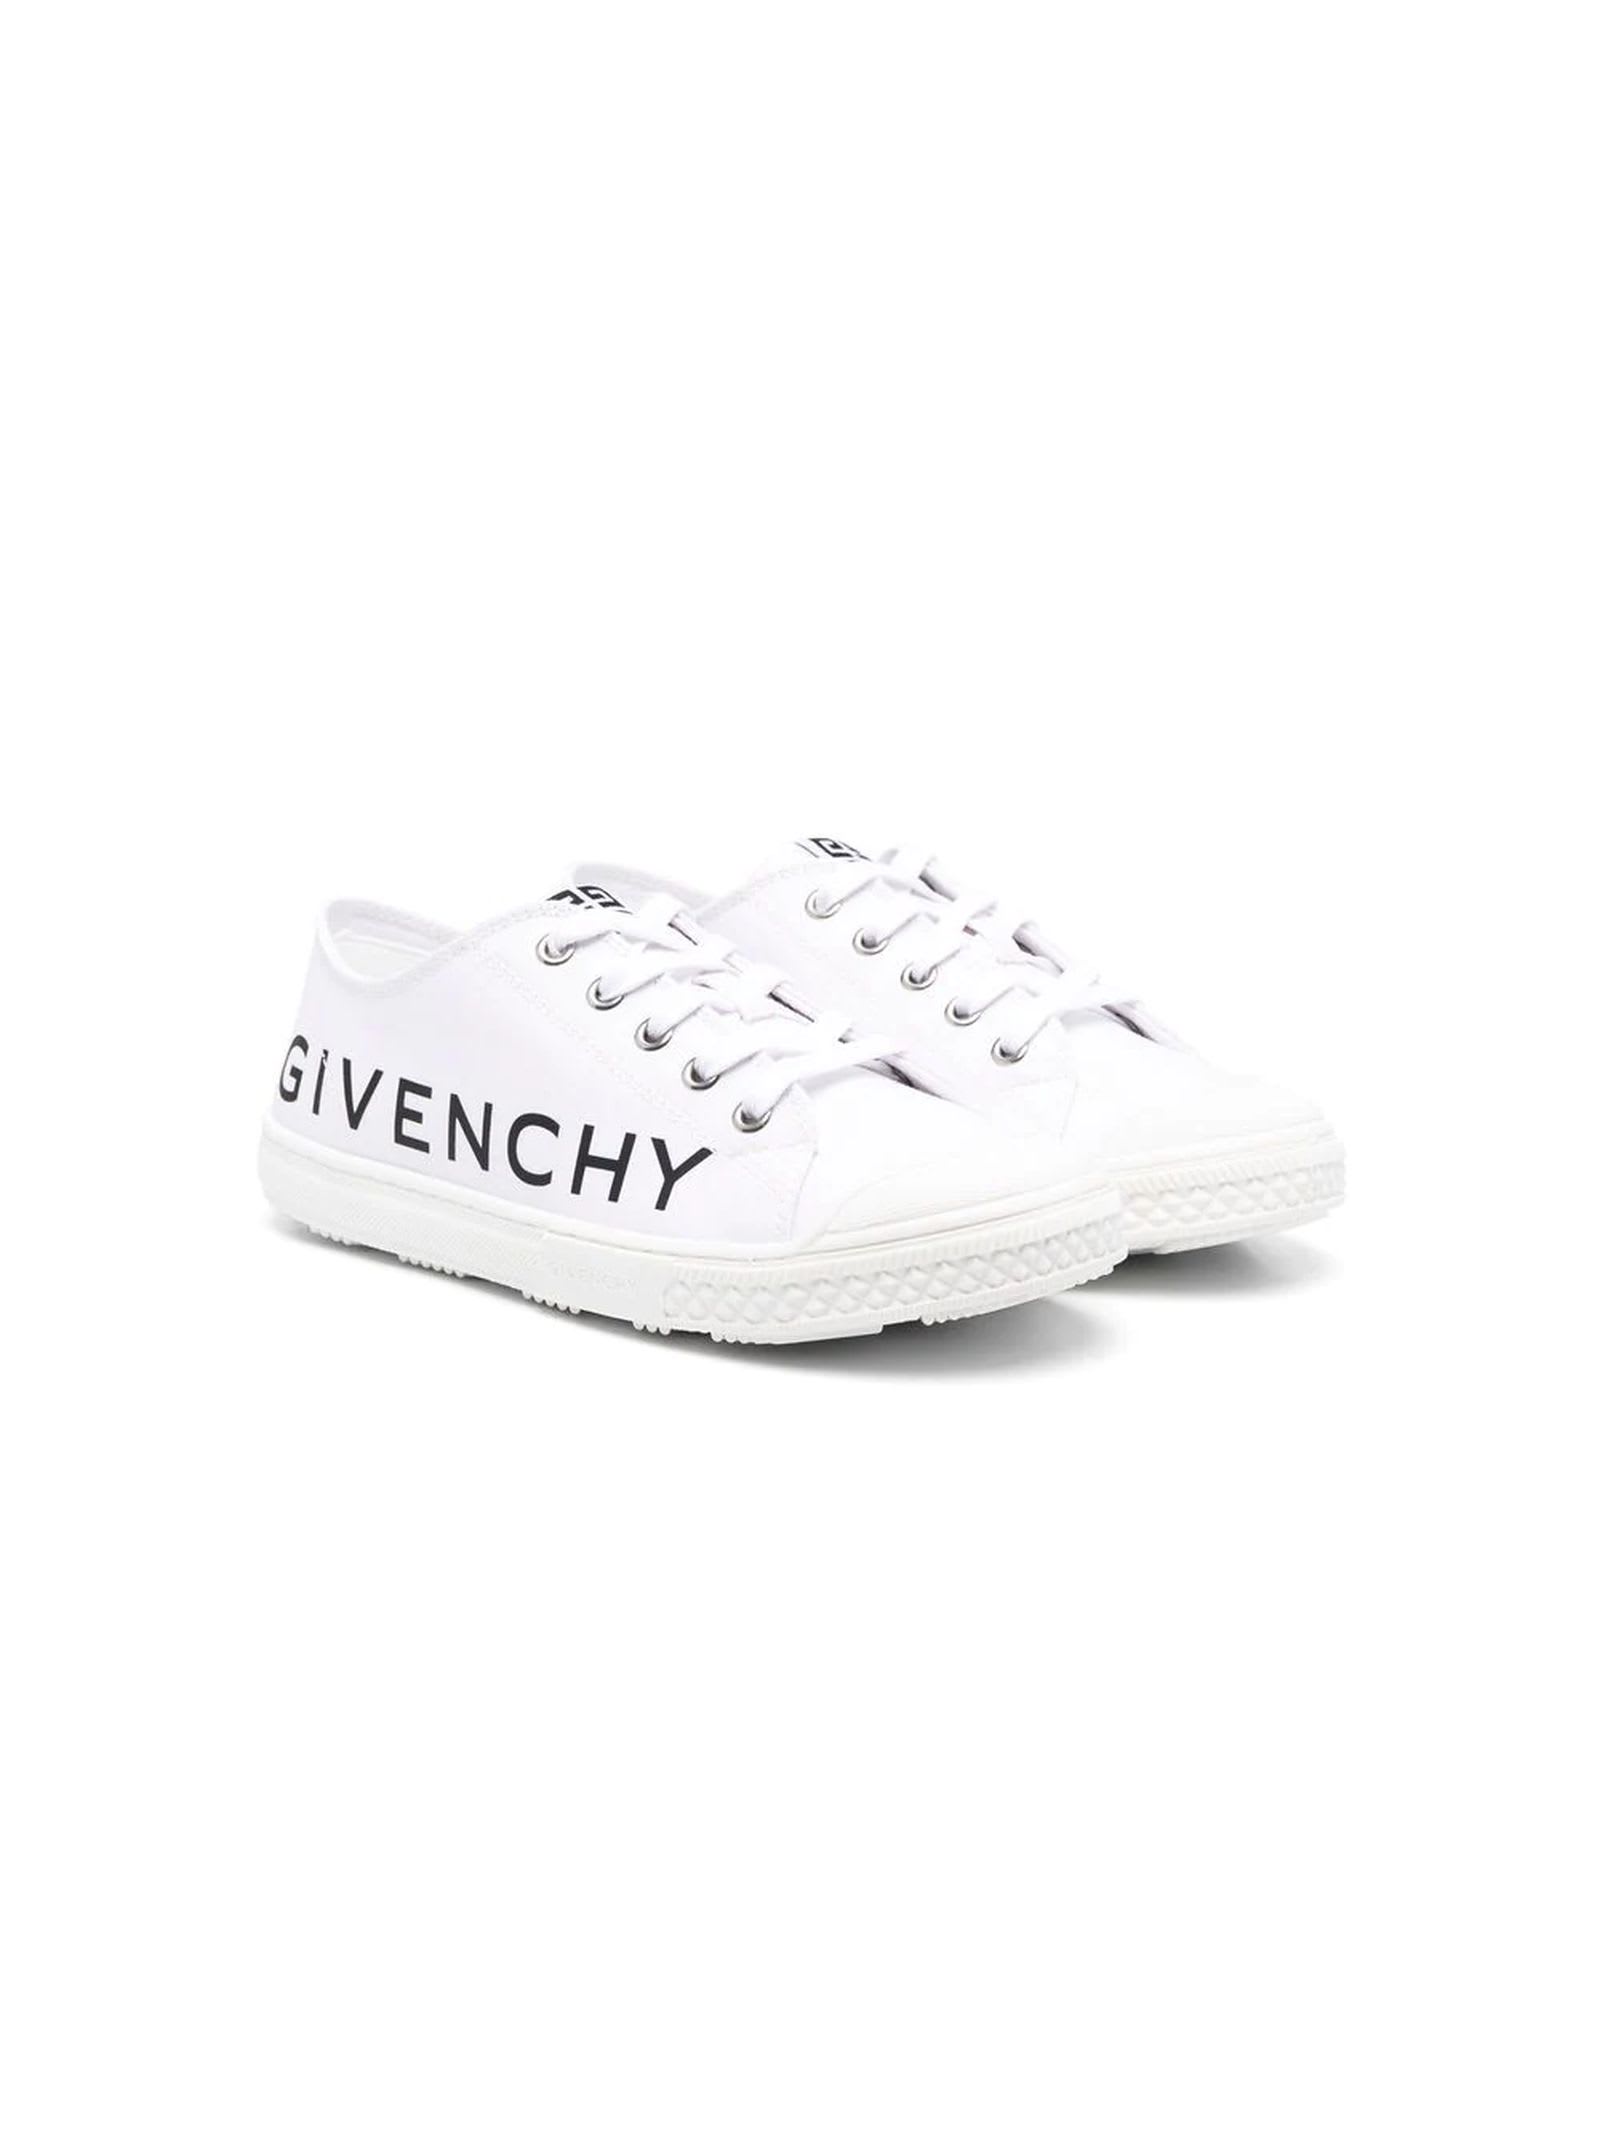 GIVENCHY WHITE LEATHER SNEAKERS